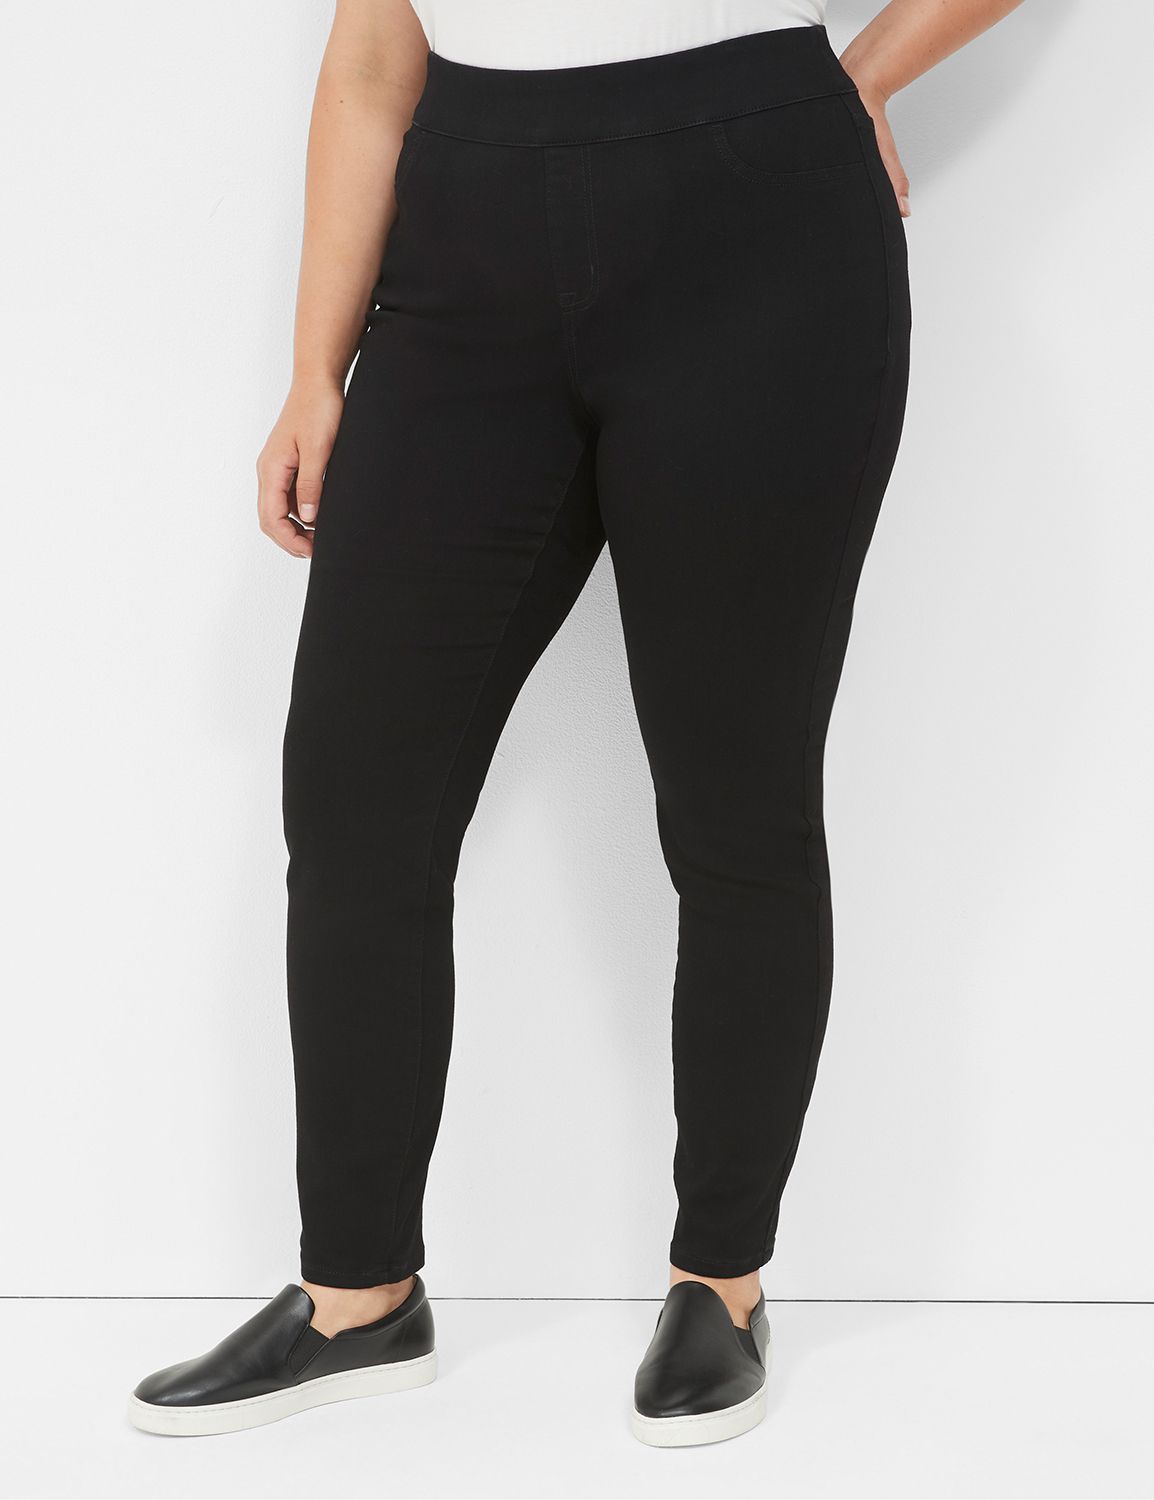 SIGNATURE HIGH RISE PULL ON JEGGING